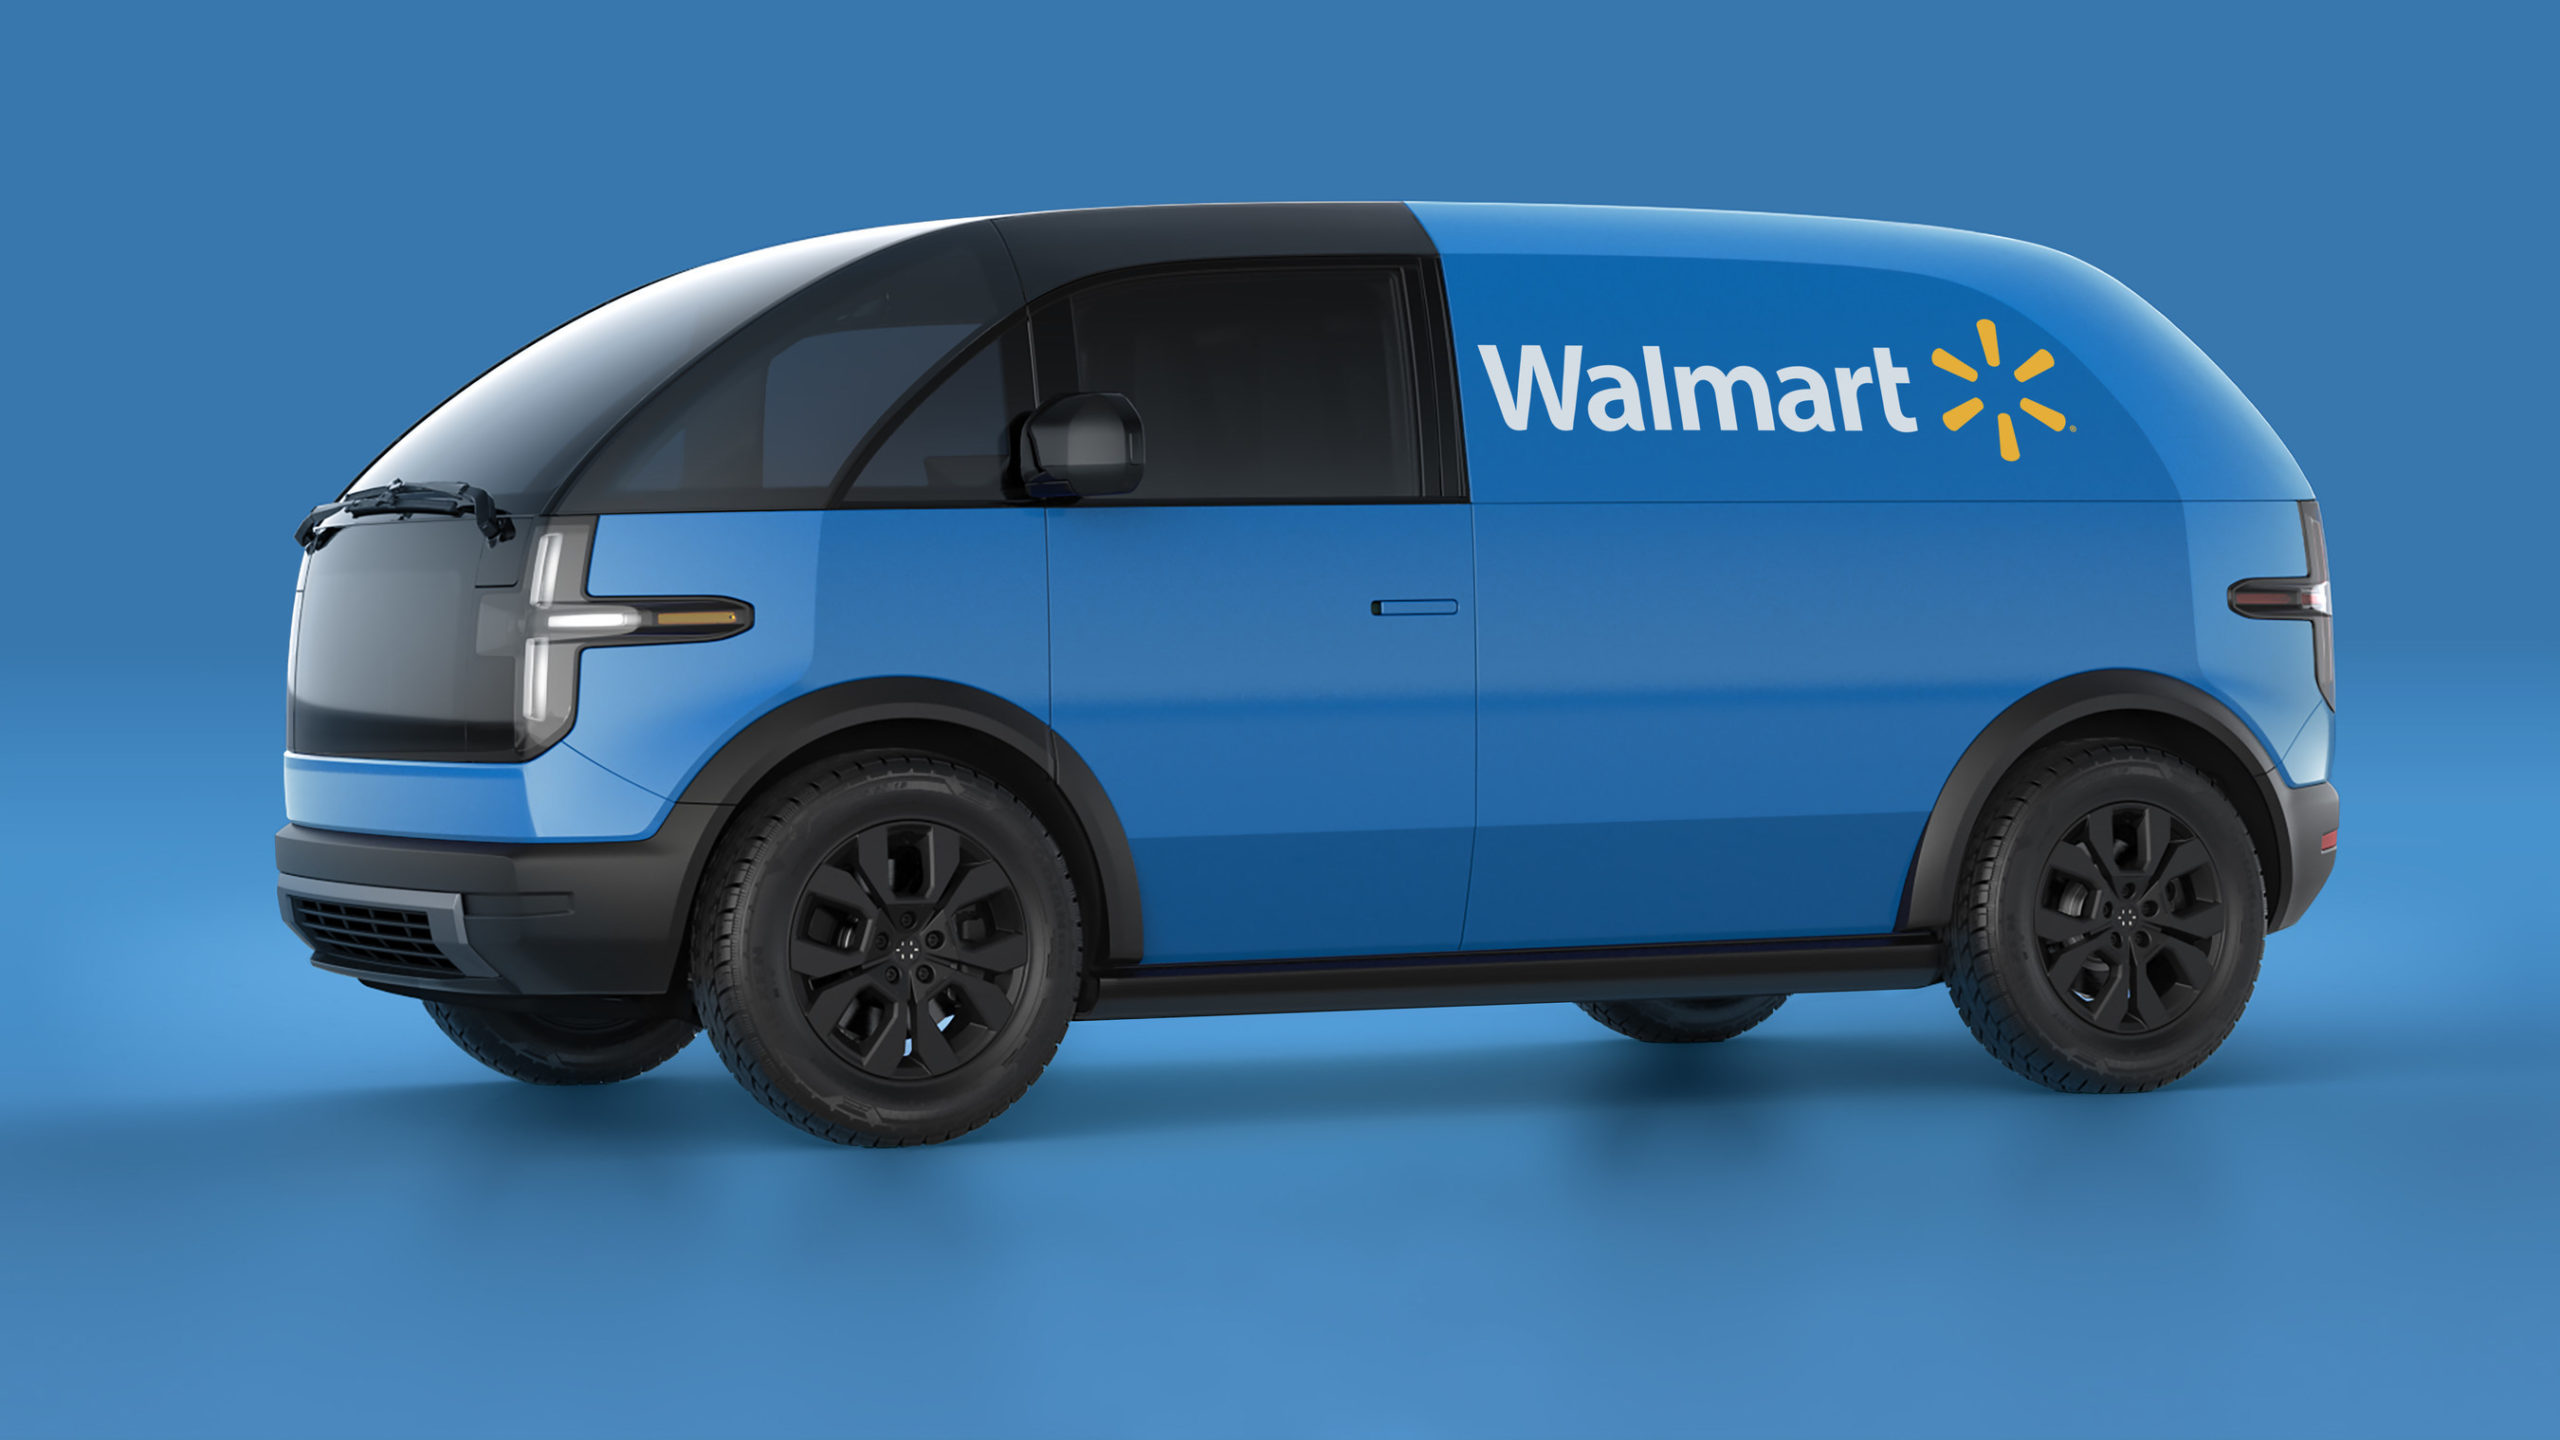 Walmart to Purchase 4500 EVs for Last Mile Deliveries